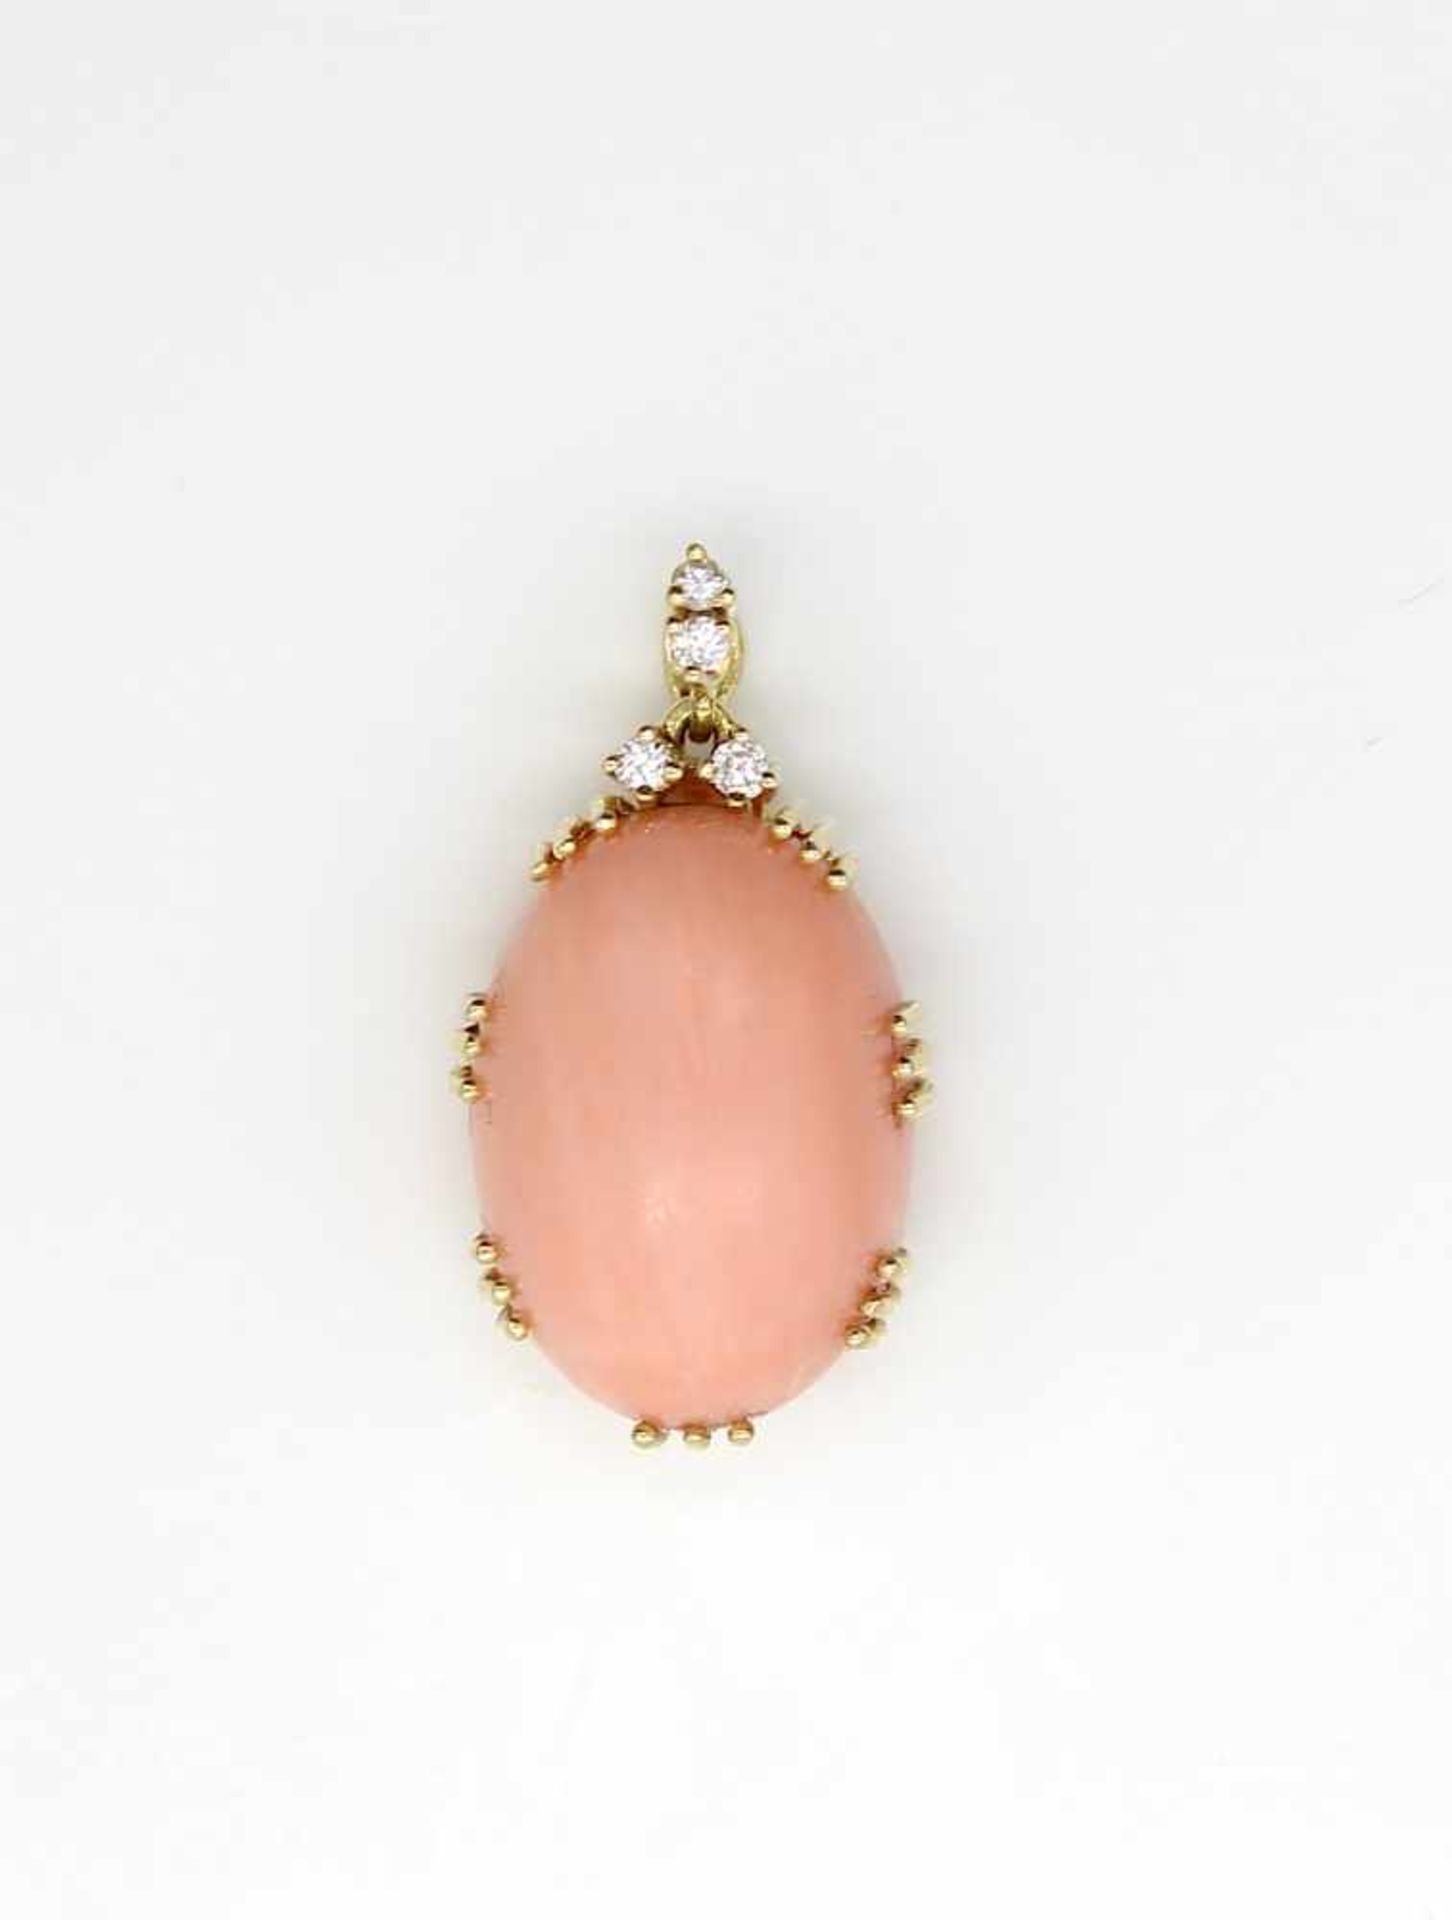 Pendant made of 585 gold with a coral and small diamonds.weight 4 g, dimensions : 13,6 x 20,2